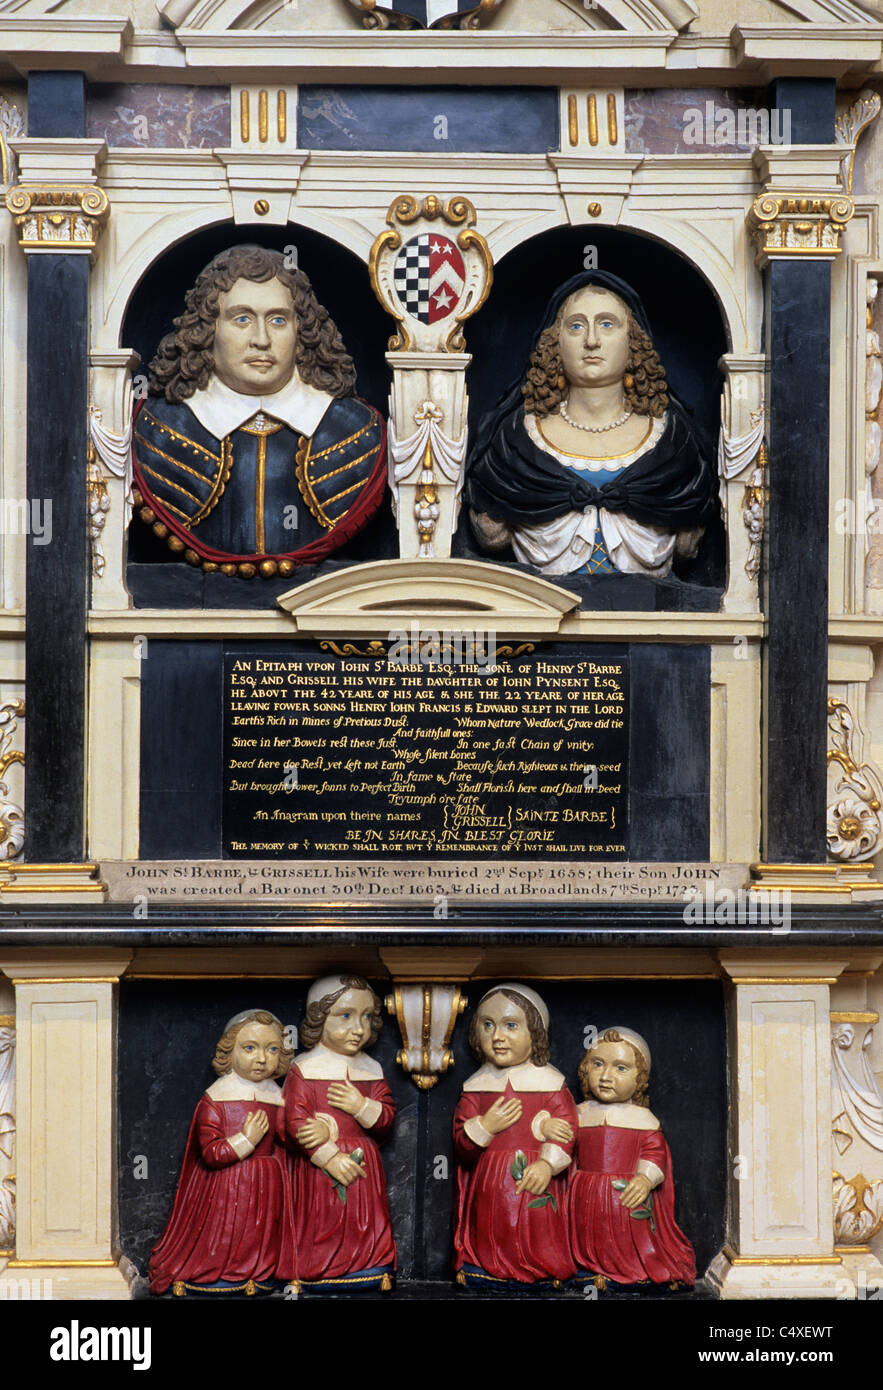 Romsey Abbey, Hampshire. John St. Barbe and wife, 1658, and 4 children, mid 17th century monument England UK English sculpture Stock Photo